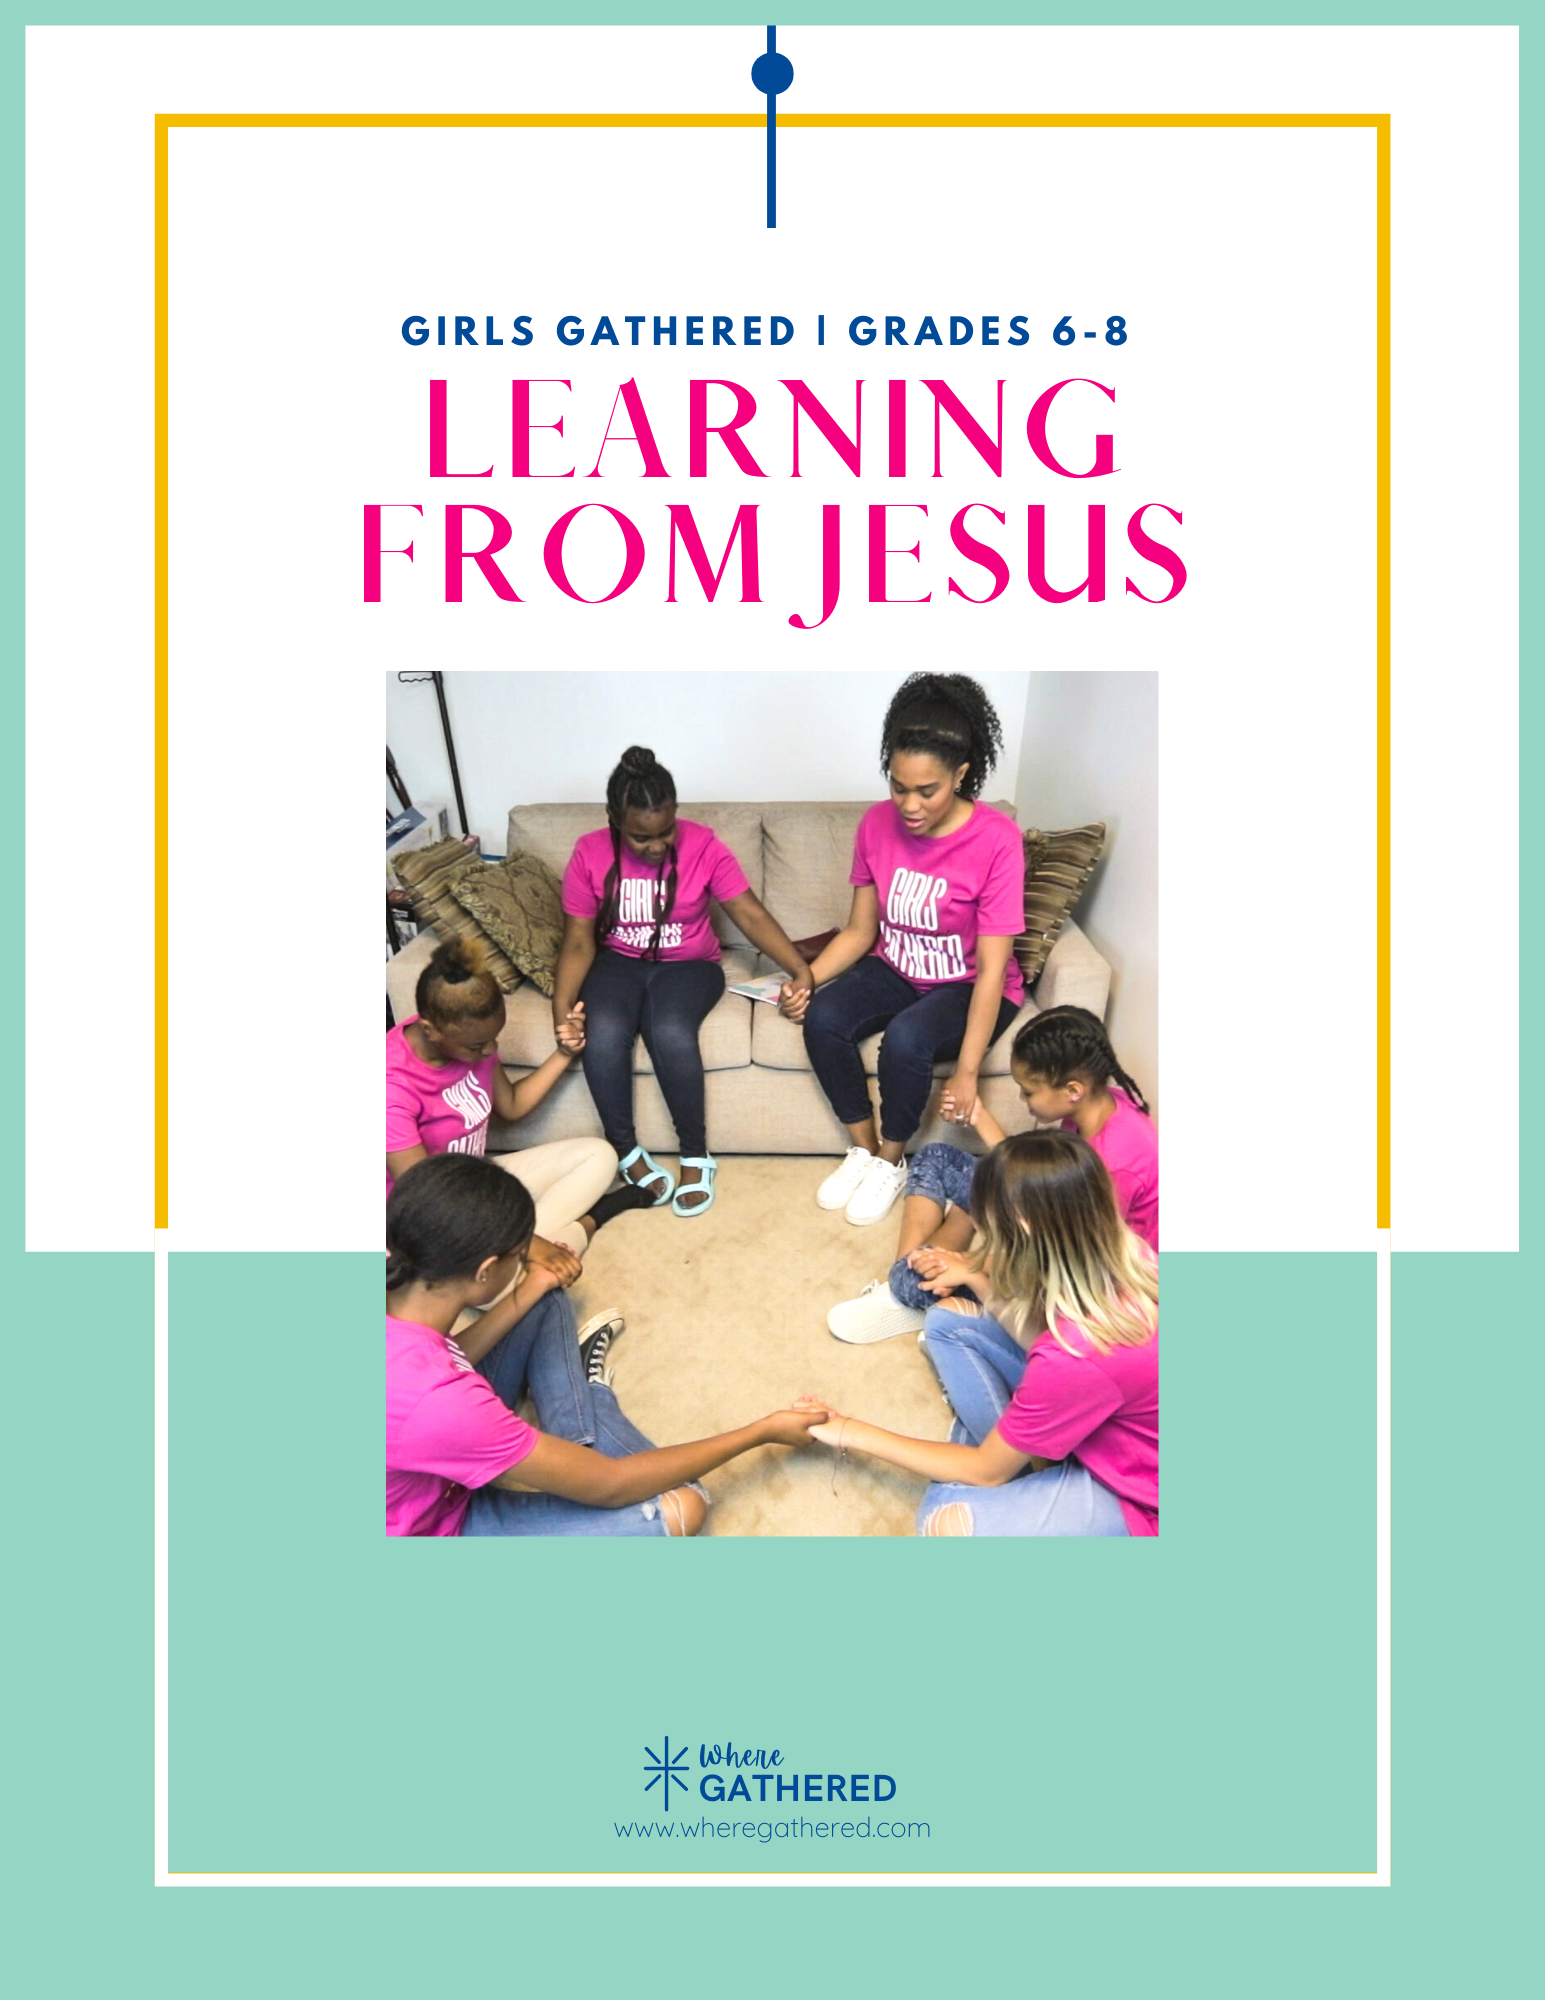 A cover of the Life Group Kit for kids Bible study lesson on Learning From Jesus for middle school girls.